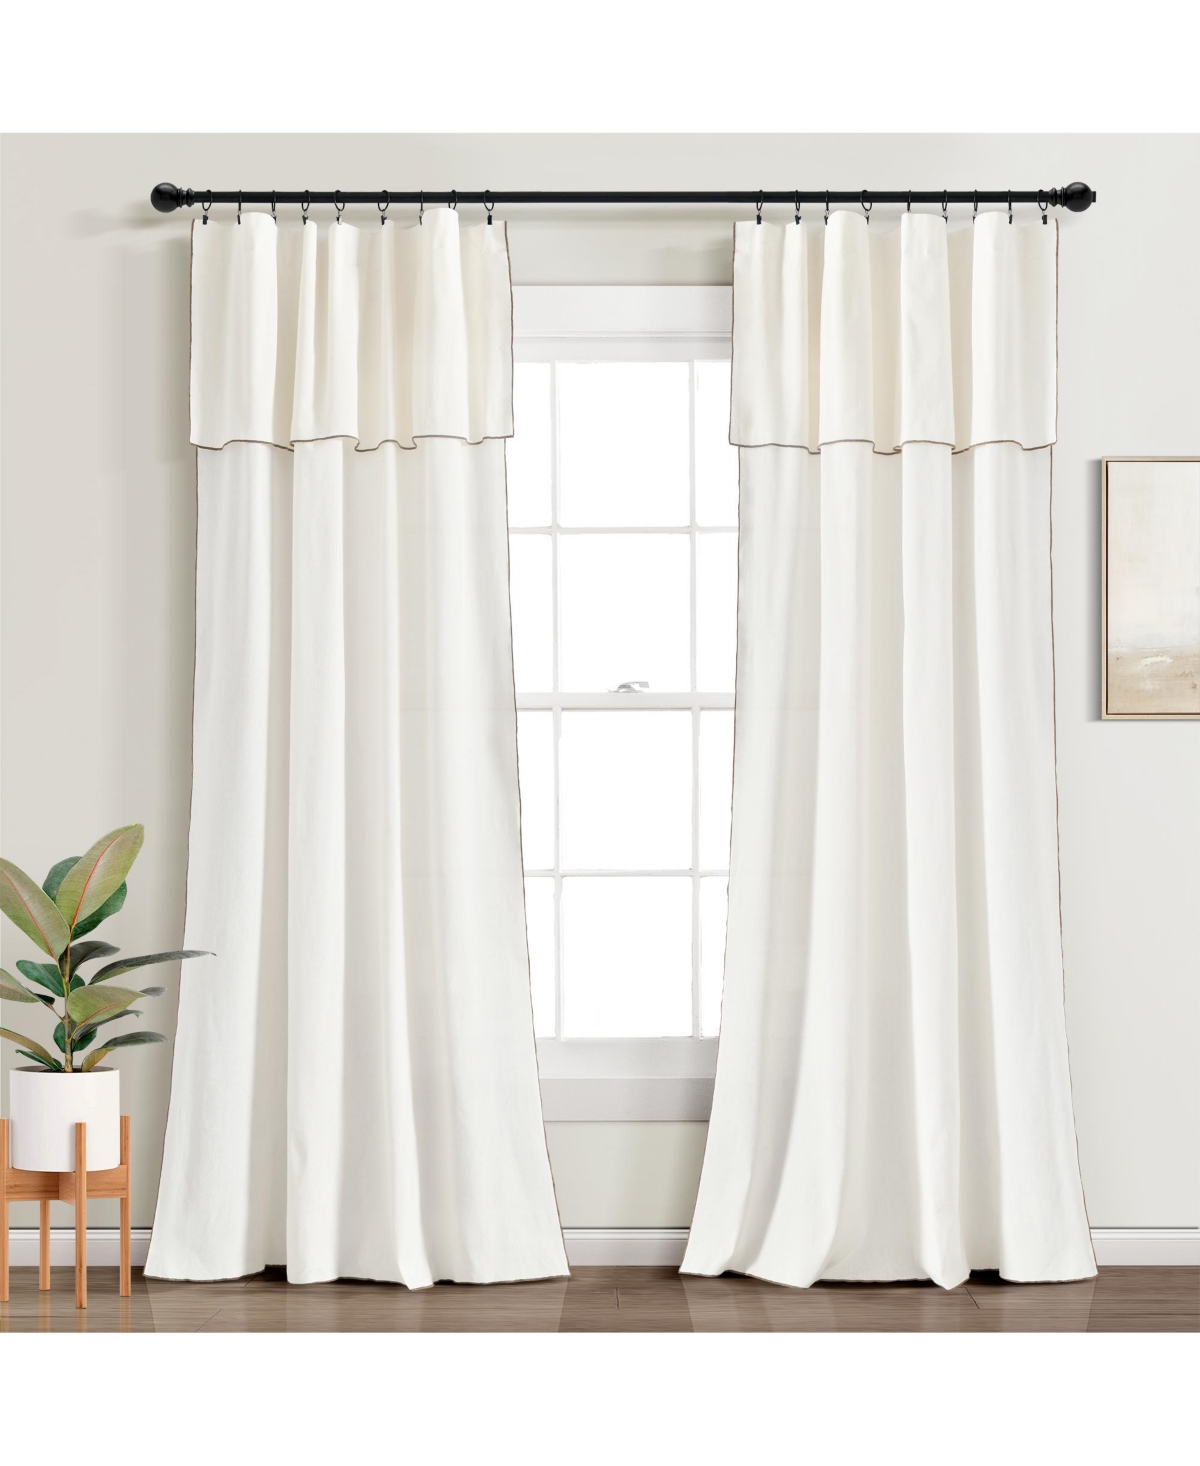 Lush Decor Modern Faux Linen Embroidered Edge With Attached Valance Window Curtain Panels In Light Linen